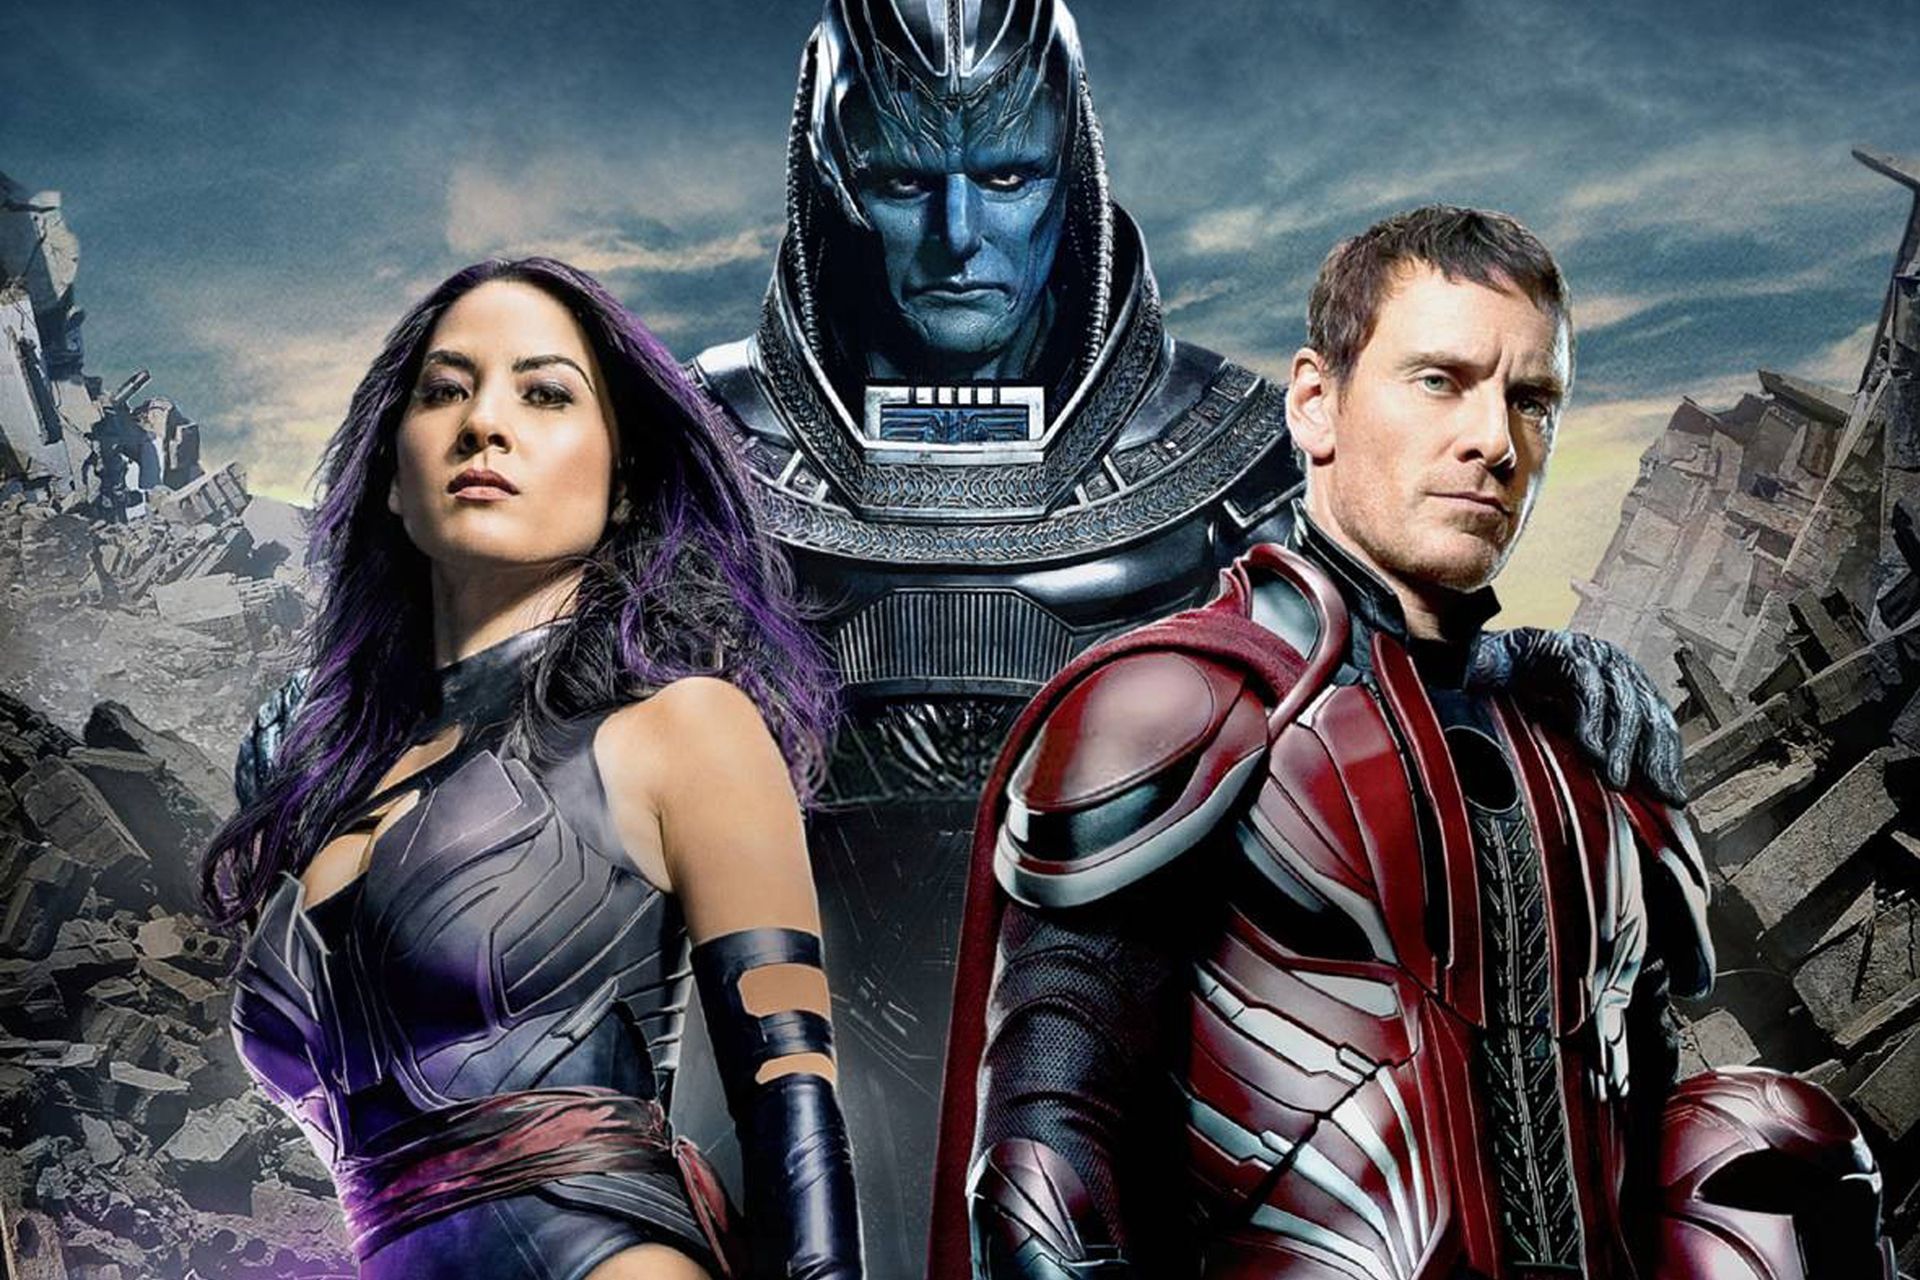 X Men Apocalypse review: a stodgy, uninvolving disappointment